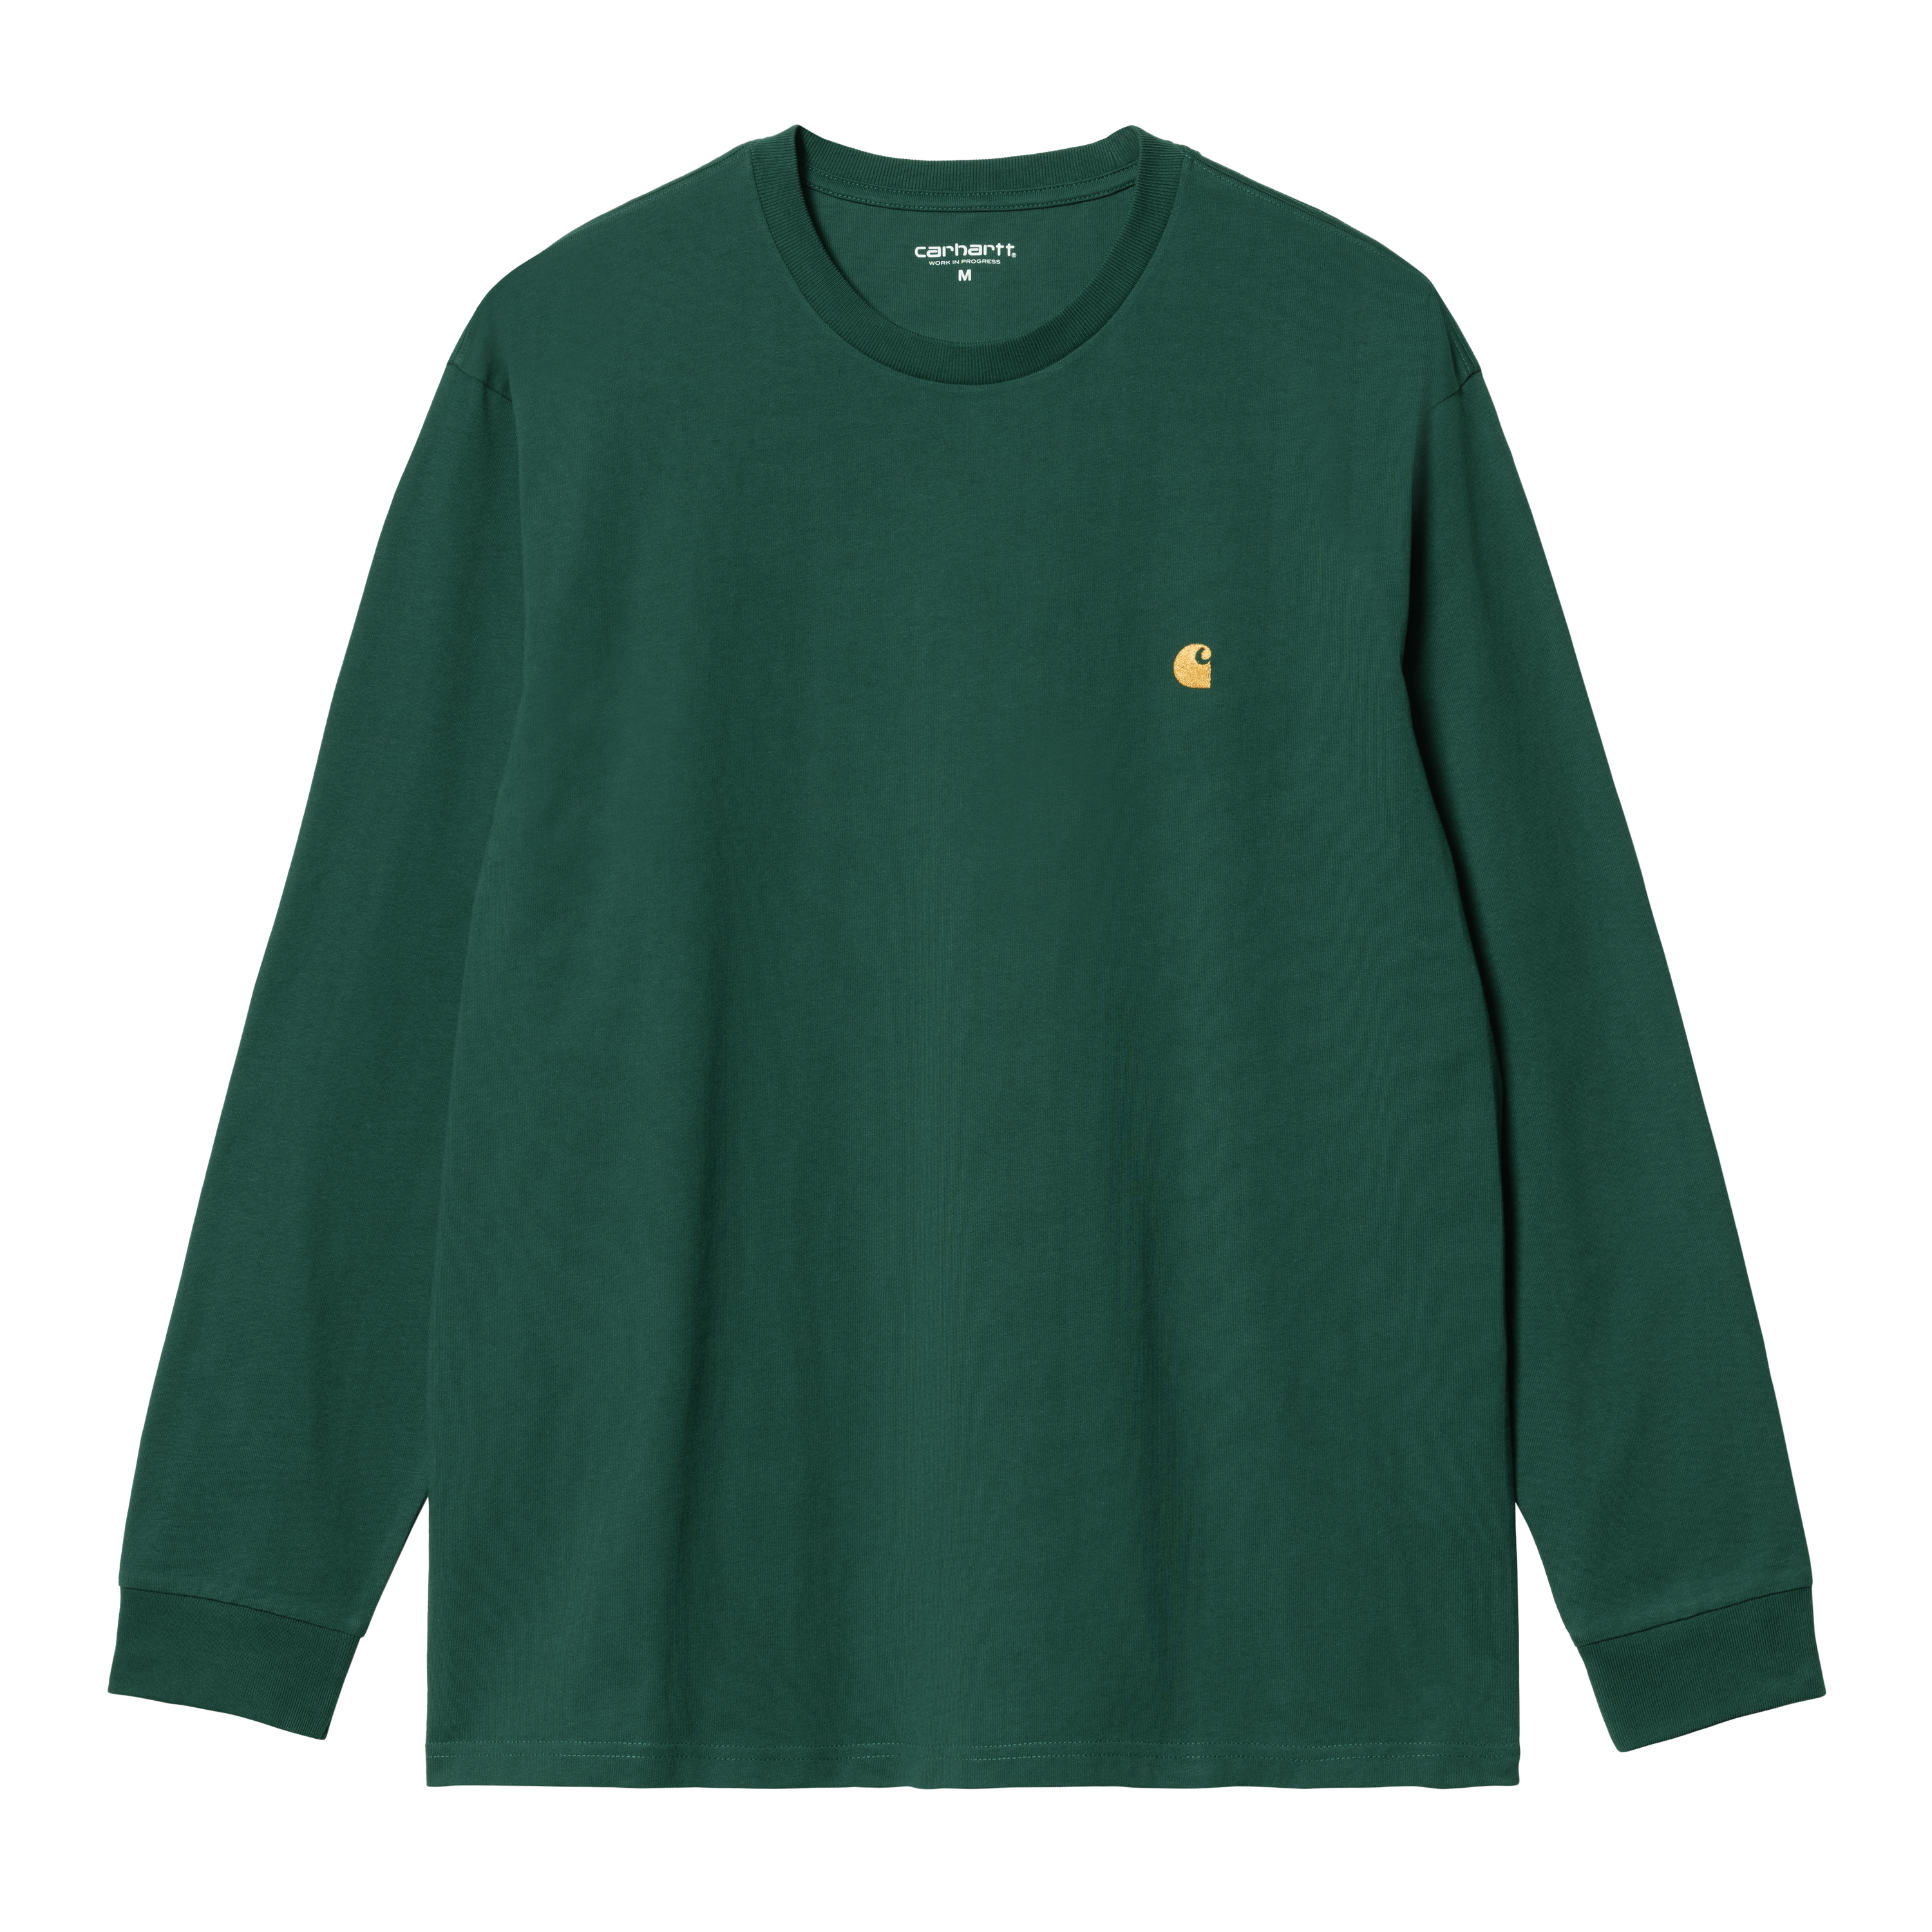 Carhartt WIP Long Sleeve Chase T-Shirt in Green